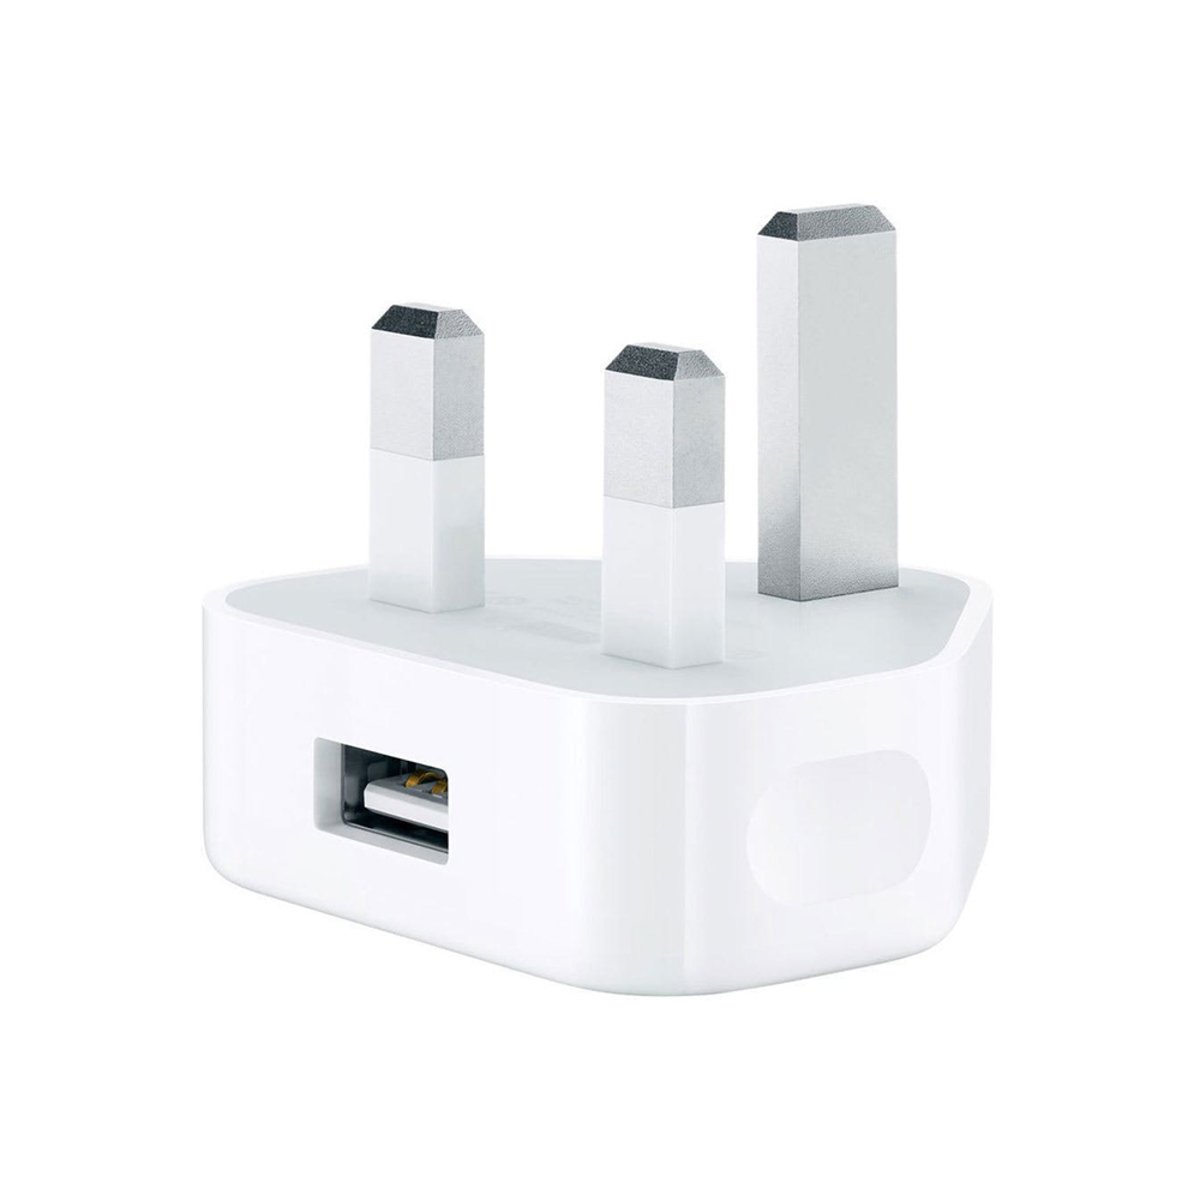 Iends Lightning Wall Charger for iPhone, iPad White AD644